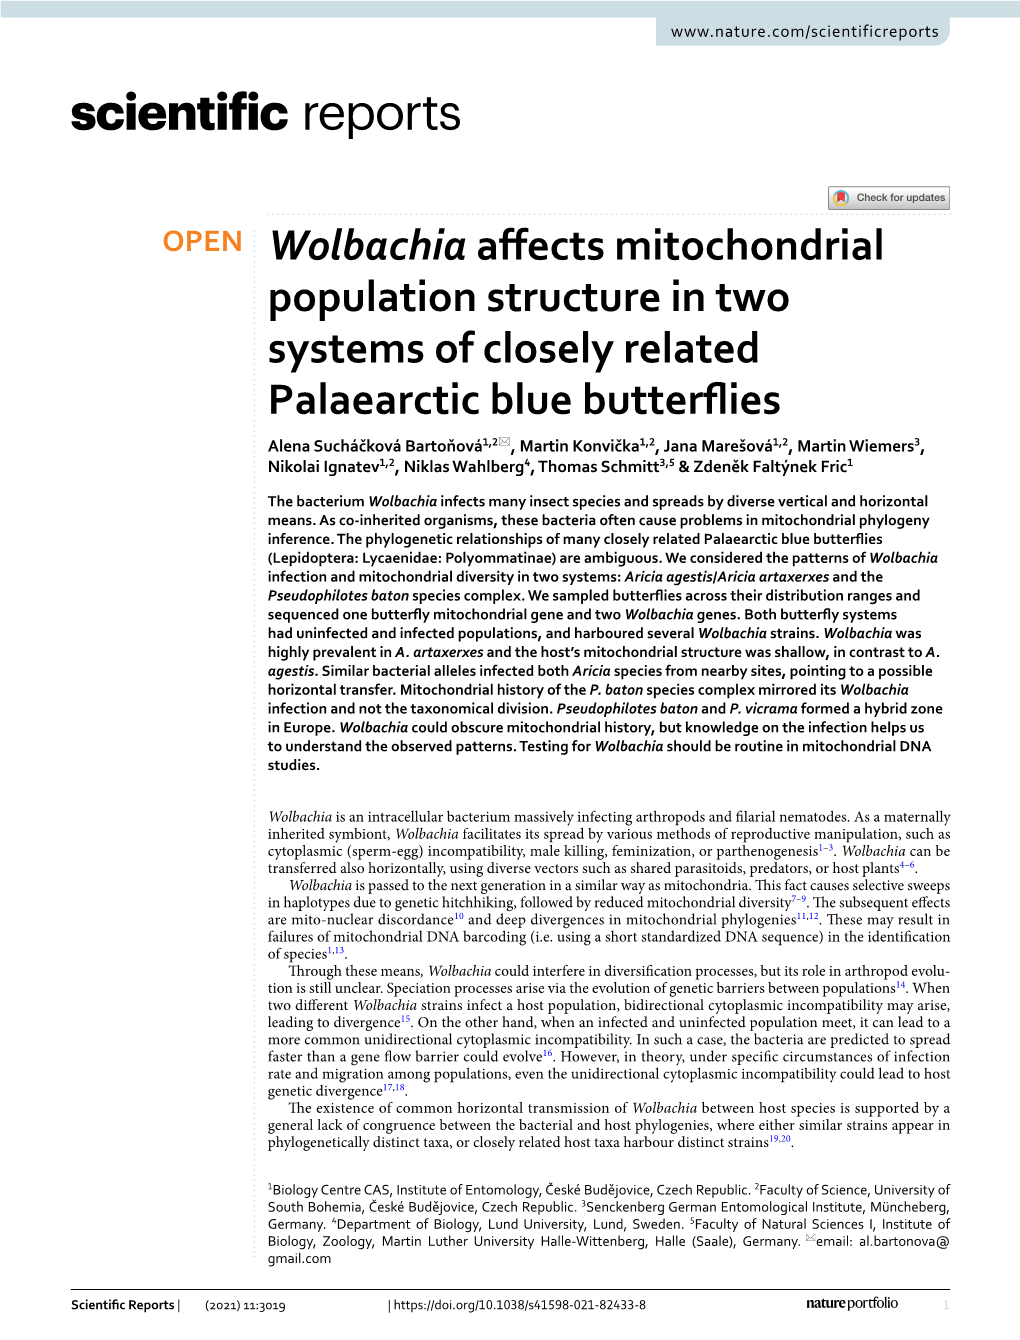 Wolbachia Affects Mitochondrial Population Structure in Two Systems of Closely Related Palaearctic Blue Butterflies